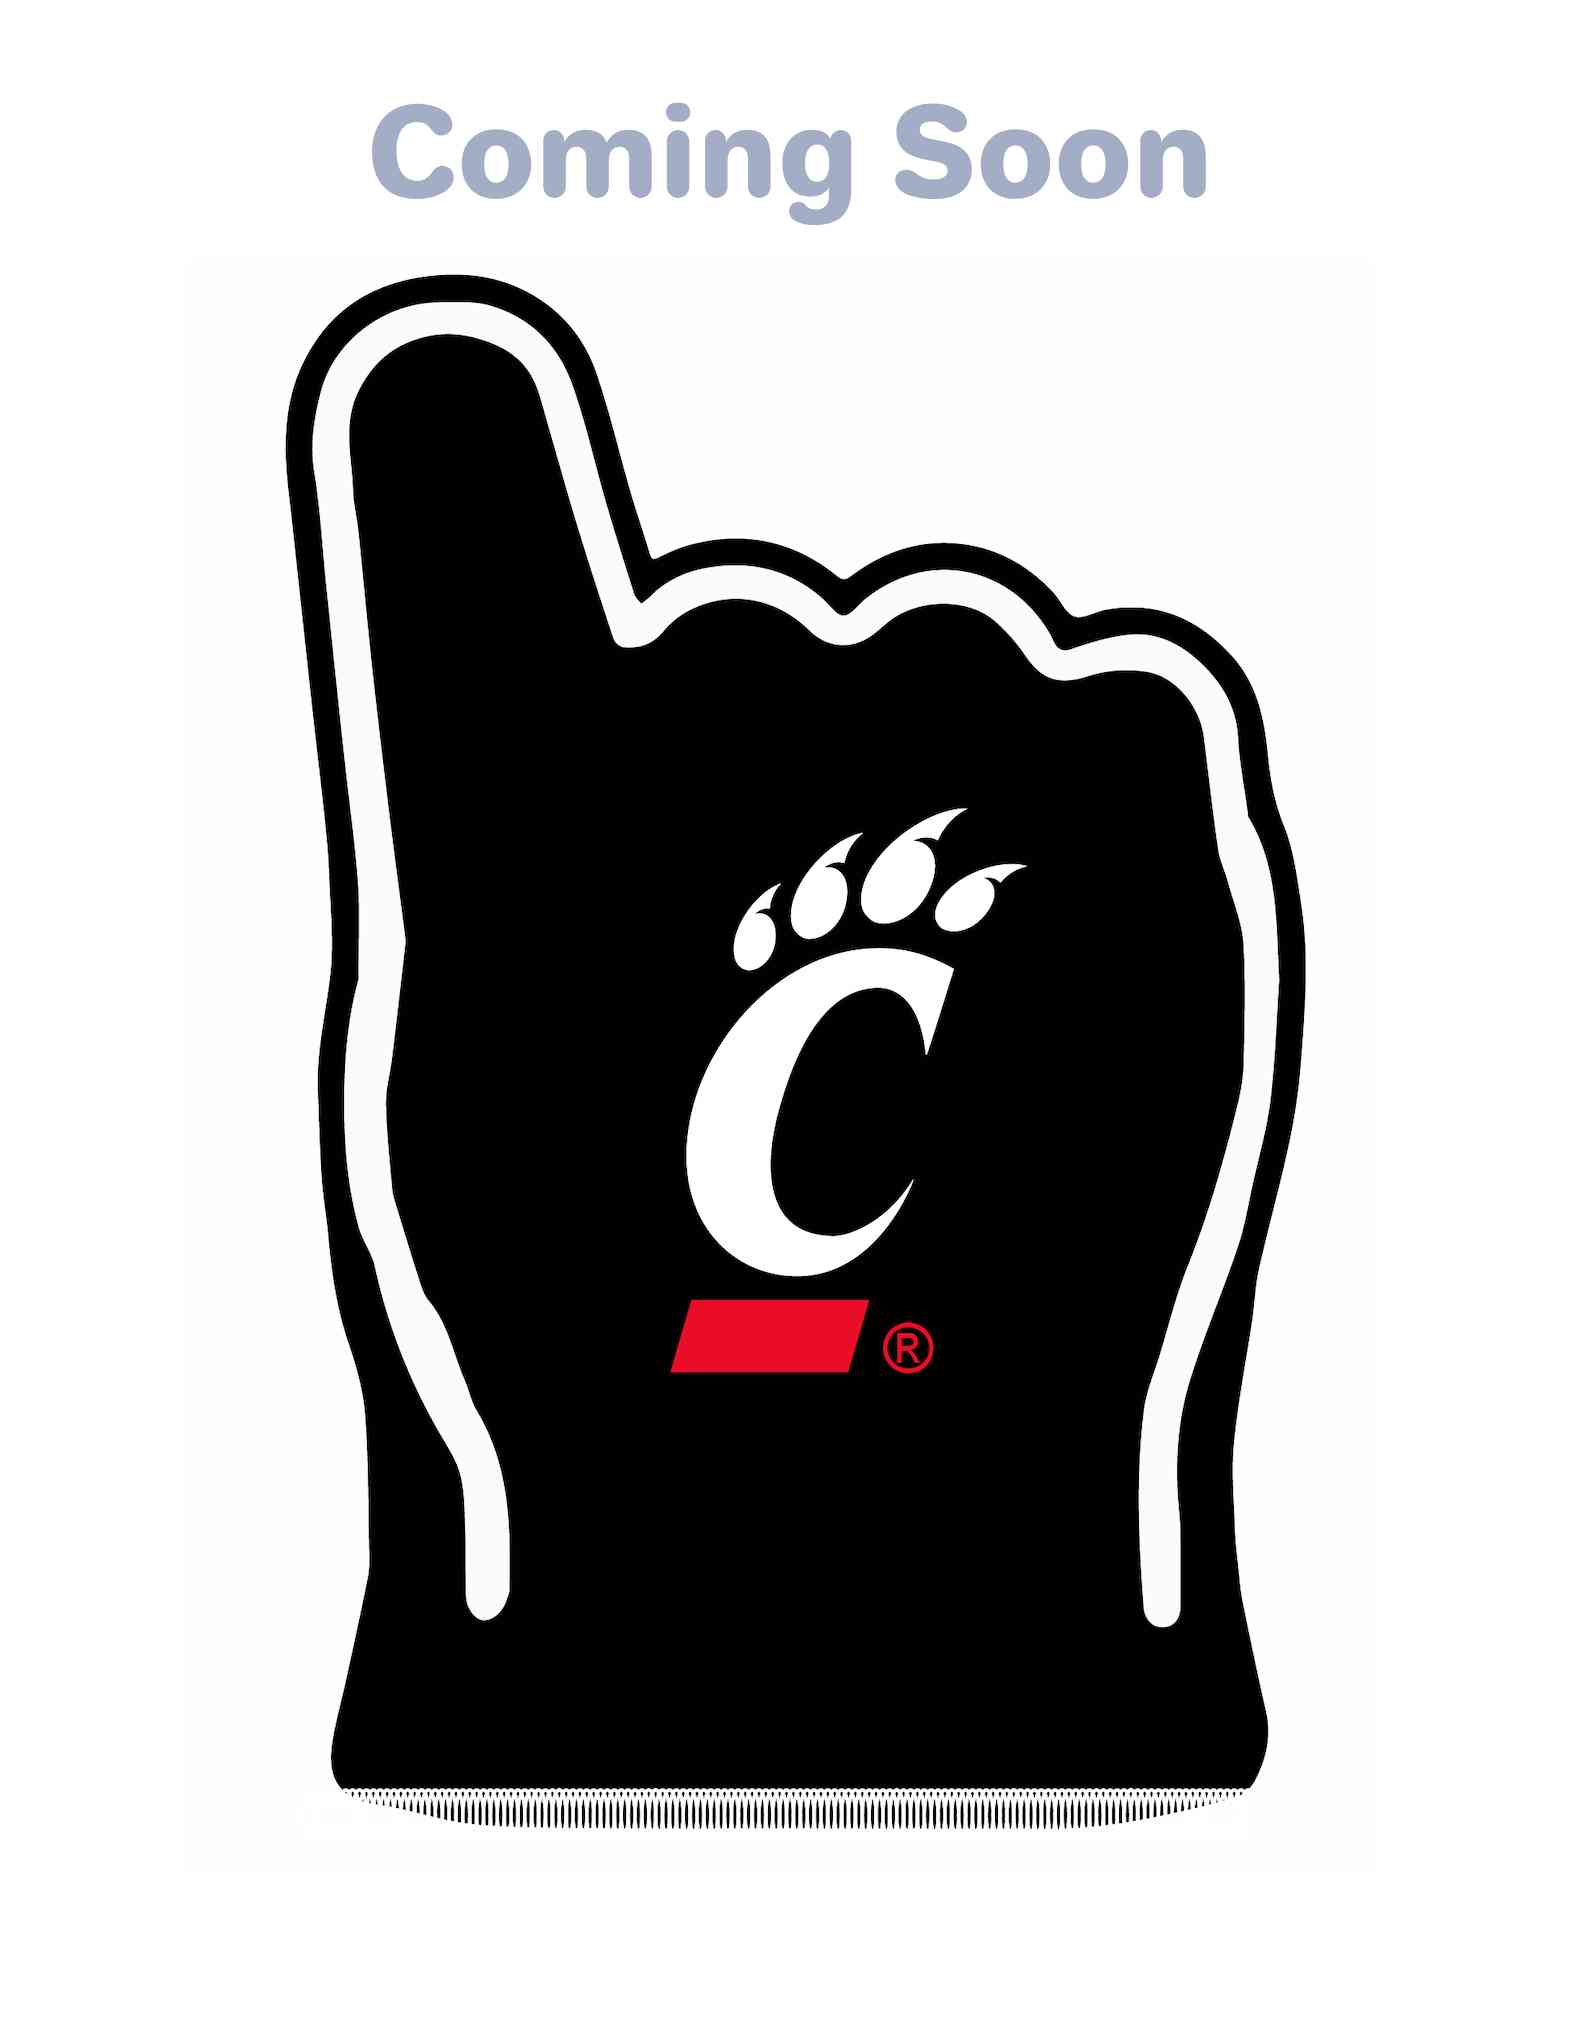 Cincinnati N-A-T-I FanMitts Baby Mittens Back